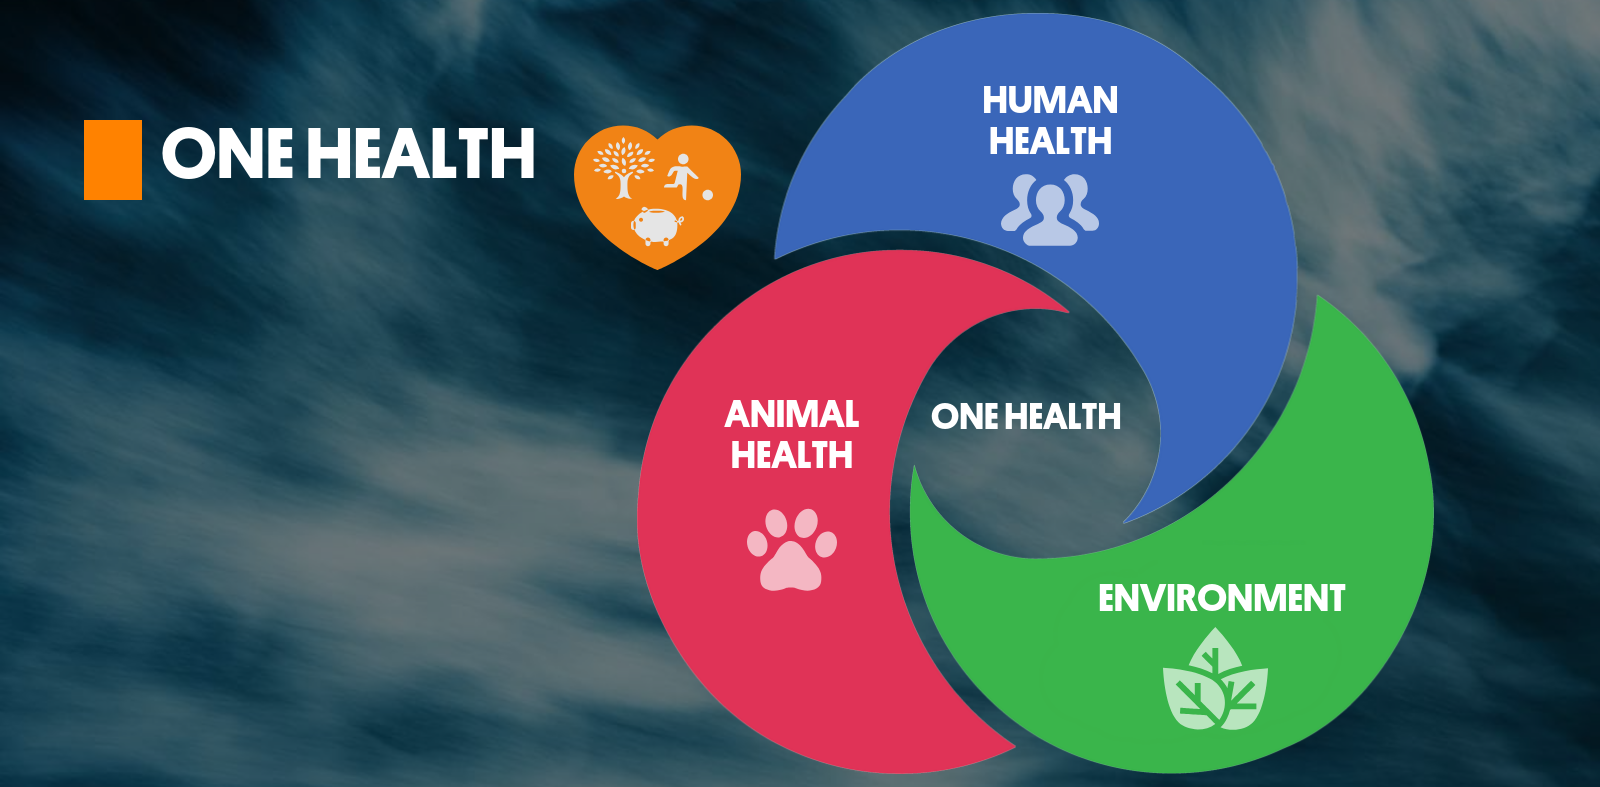 ONE HEALTH DEFINITION | Tripartite and UNEP support OHHLEP’s definition of “One Health” | 1 December 2021|